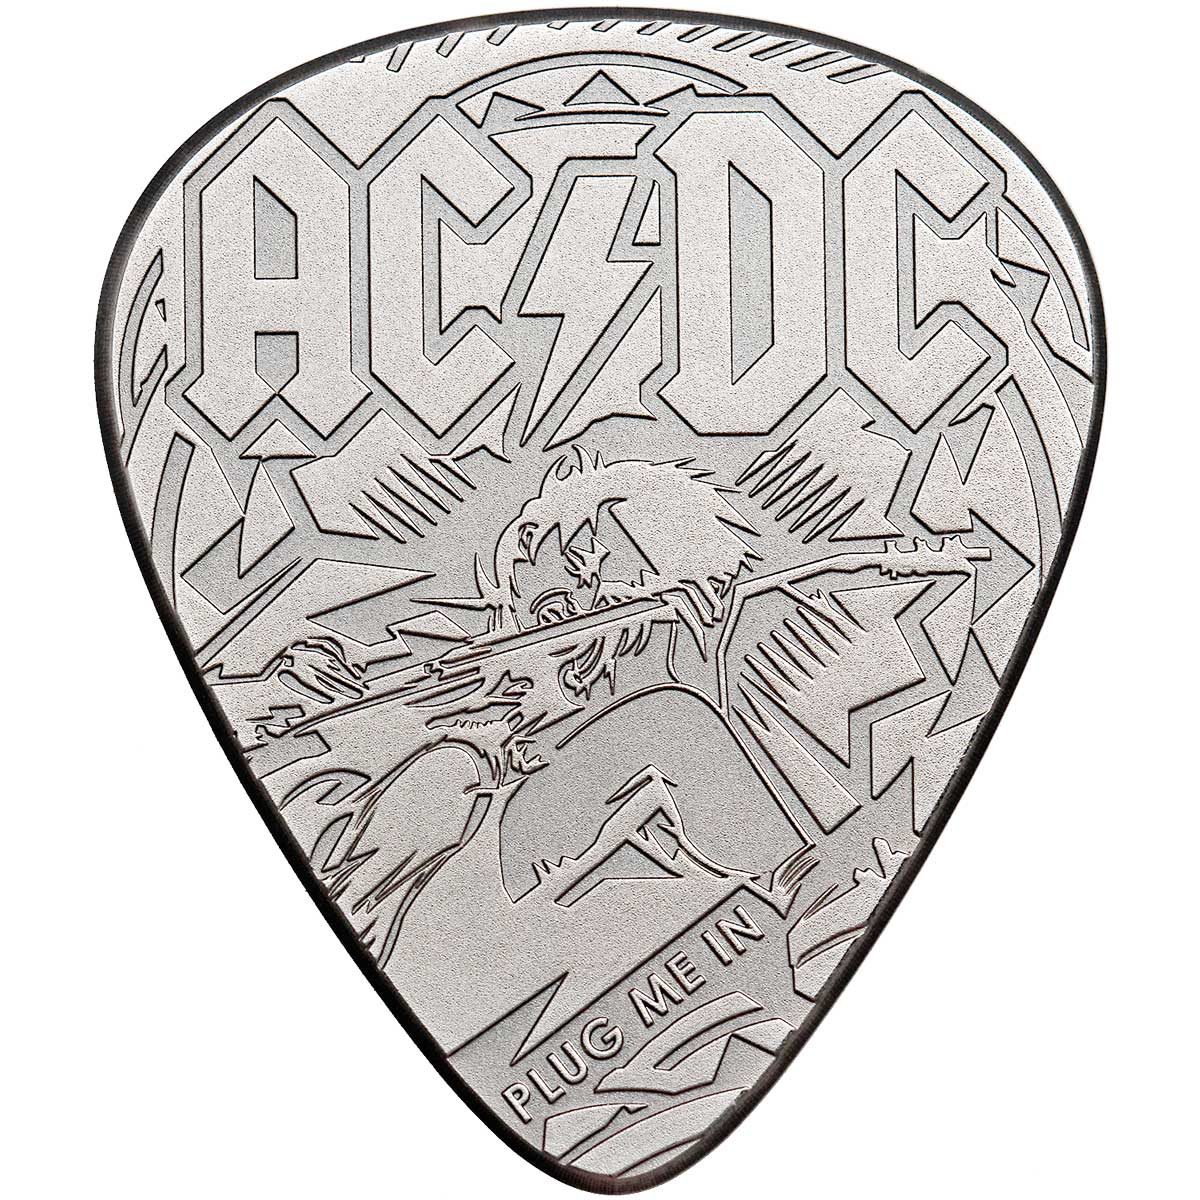 AC/DC GUITAR PICK PLUG ME IN 2019 Cook Islands 1/4oz proof coin